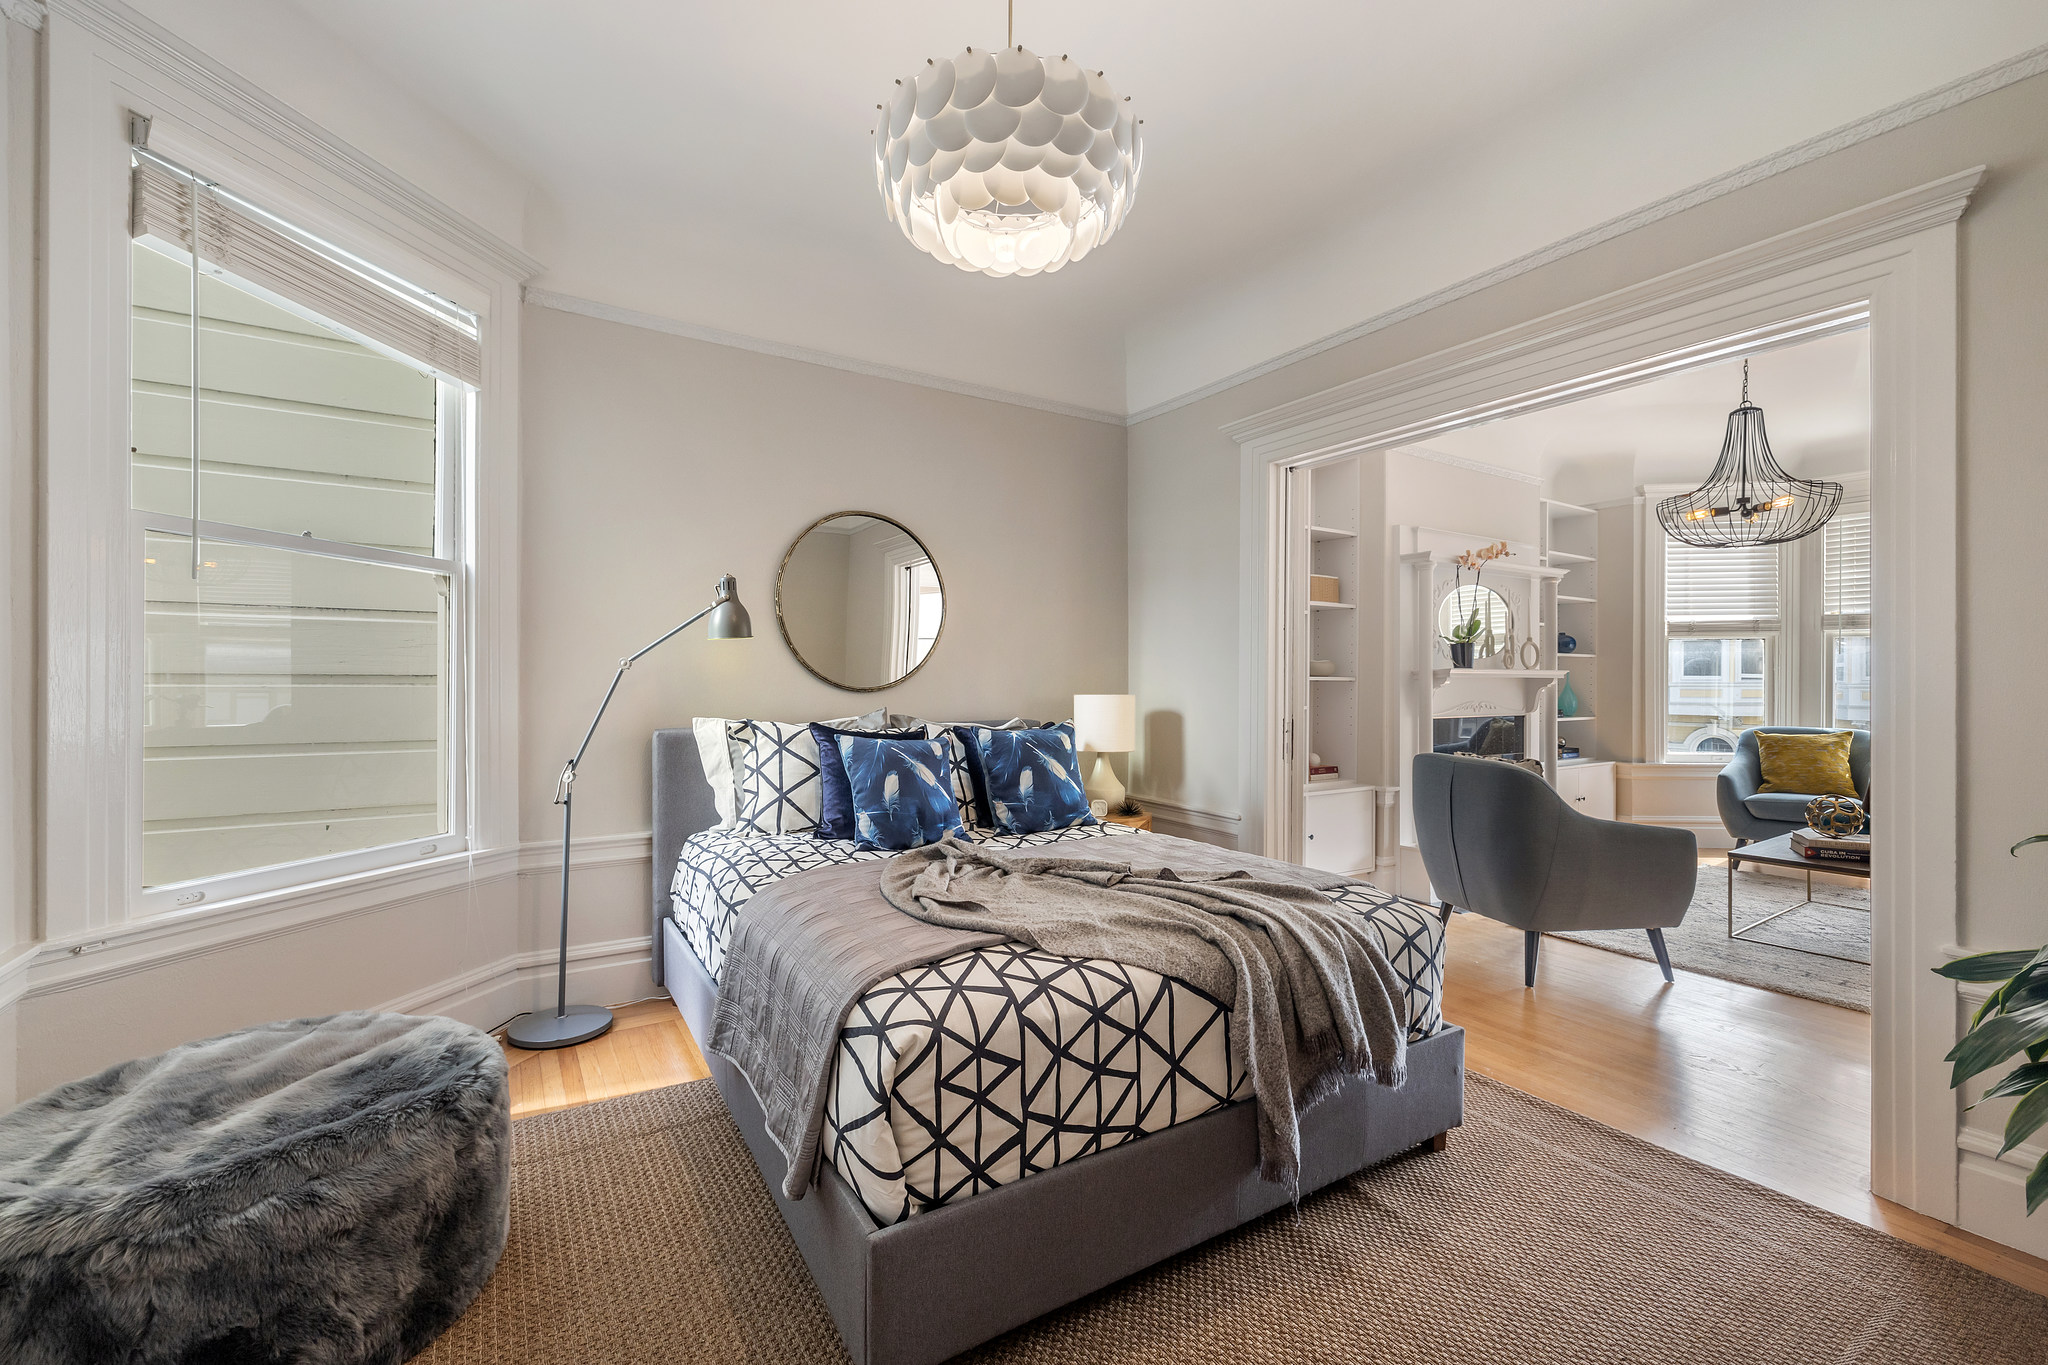 Property Photo: View of a bedroom with glass light fixture